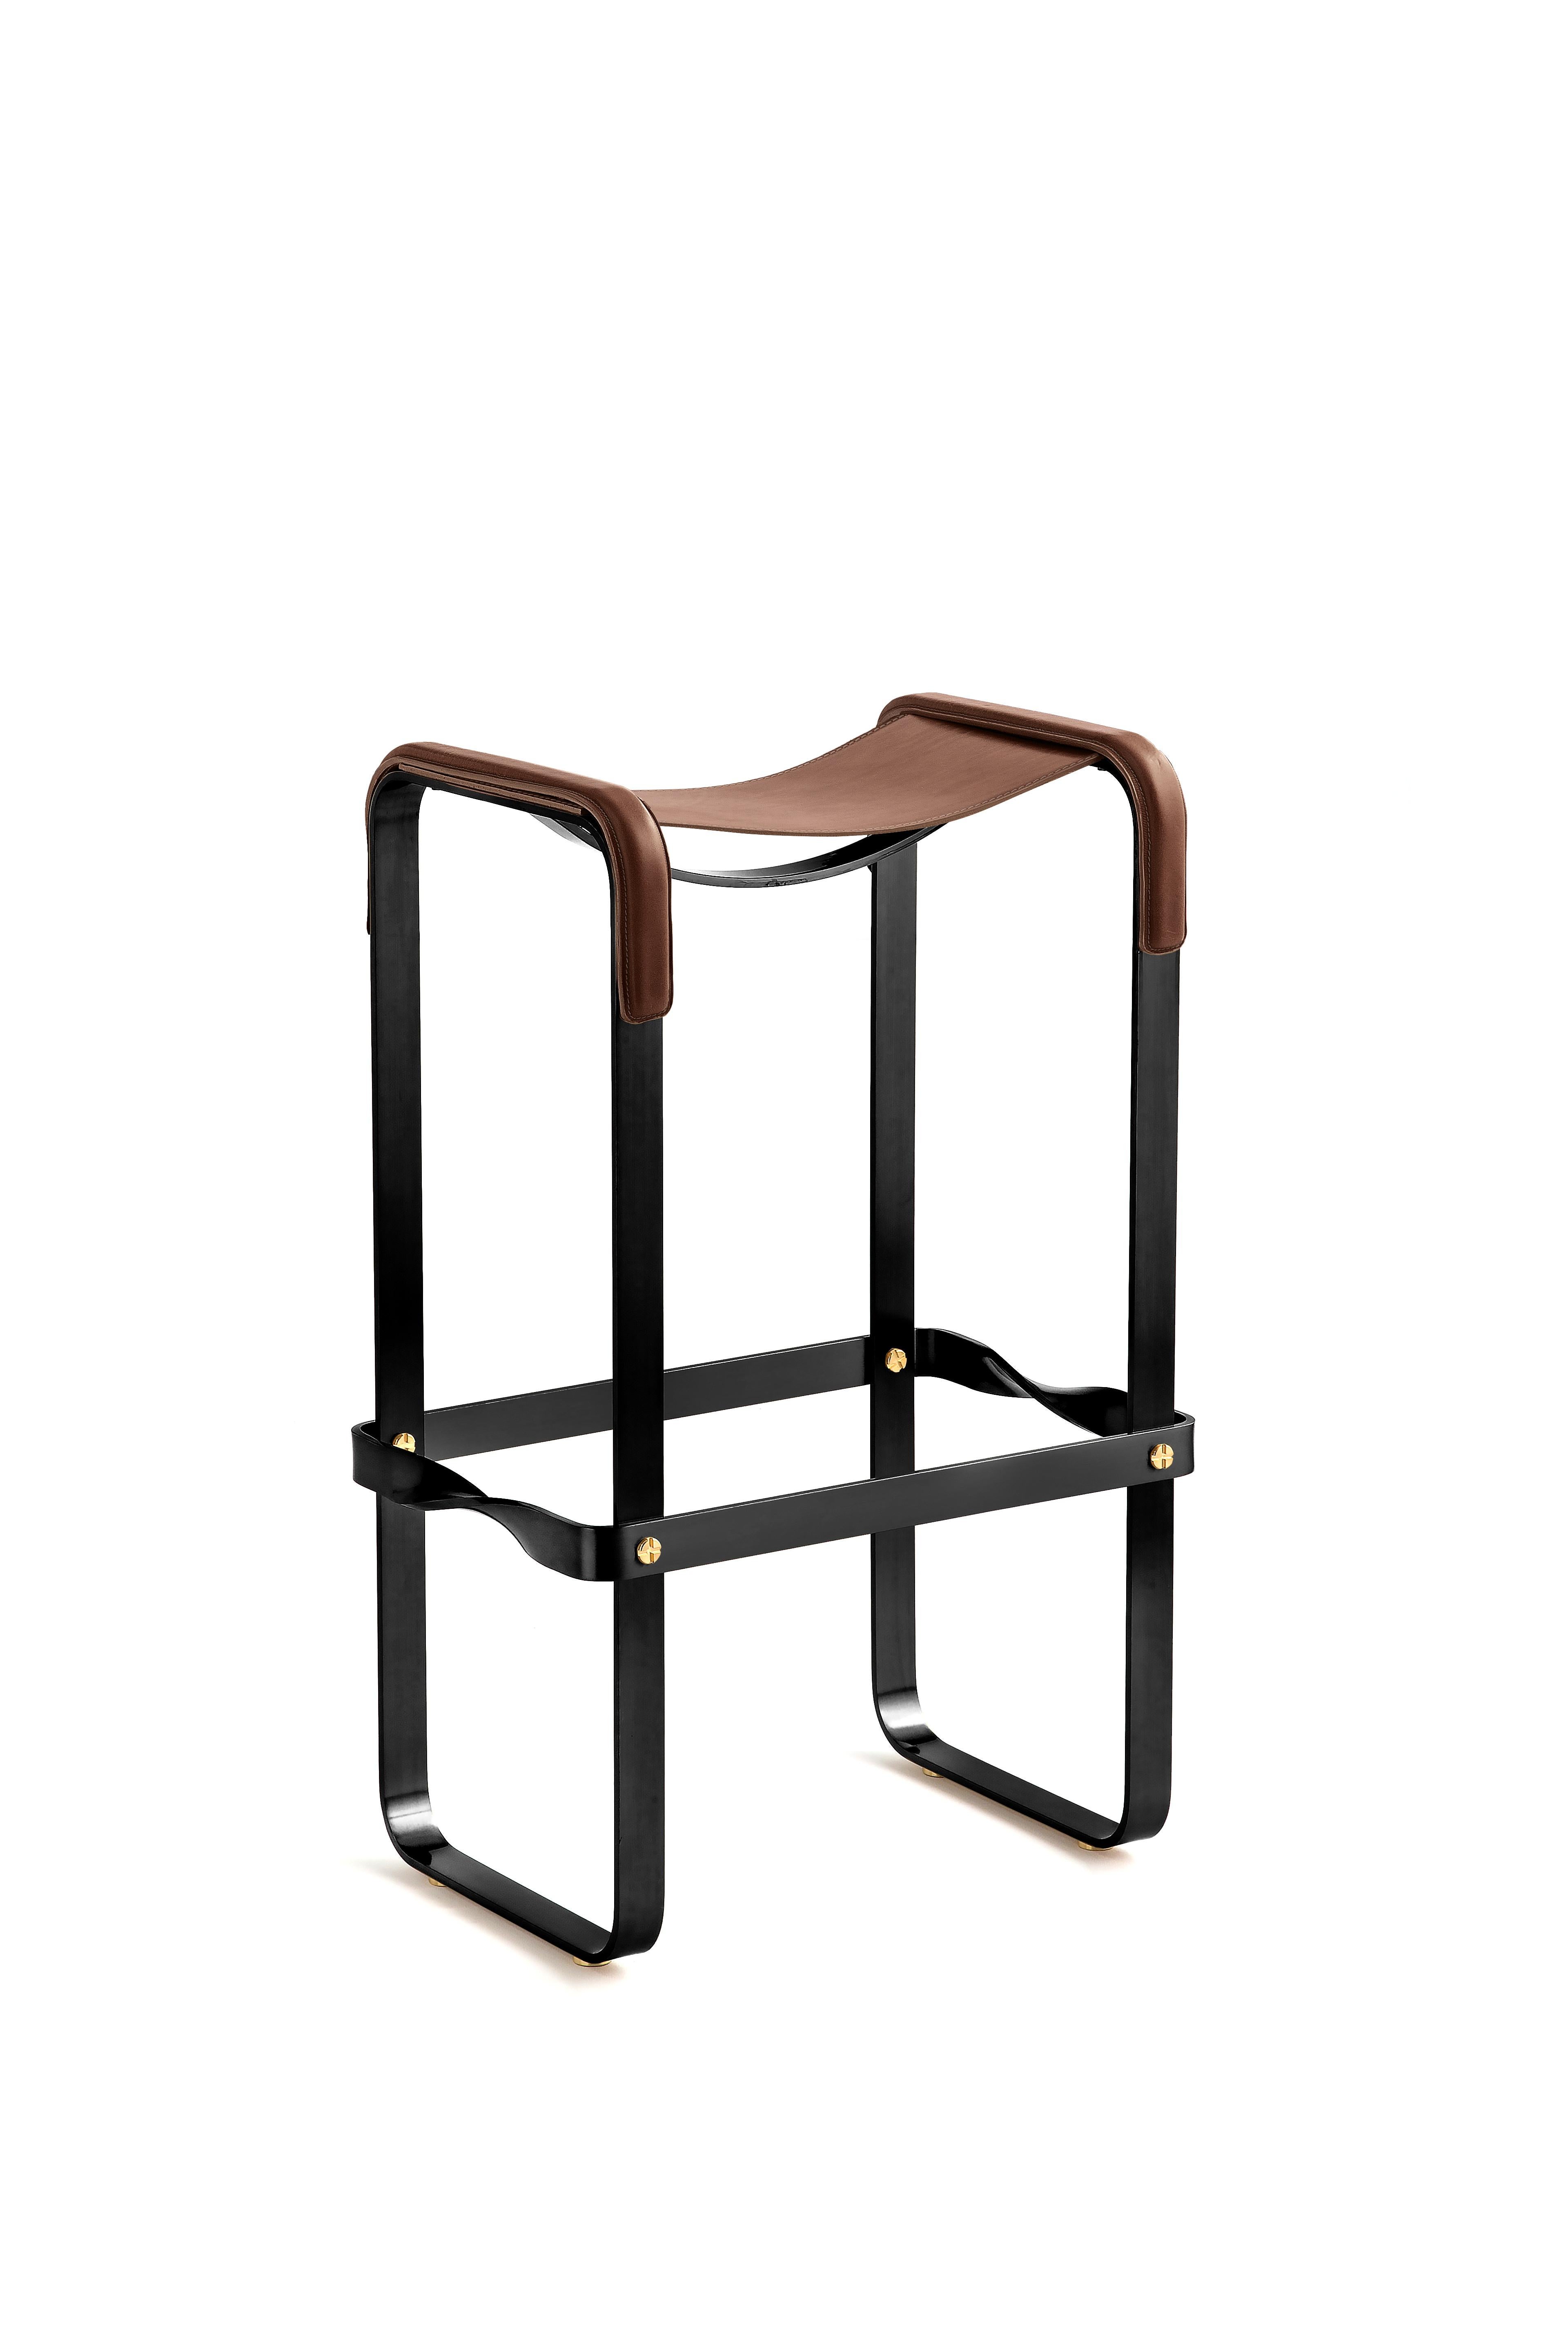 Spanish Set of 3 Classic Contemporary Bar Stool Black Smoke Steel & Dark Brown Leather For Sale